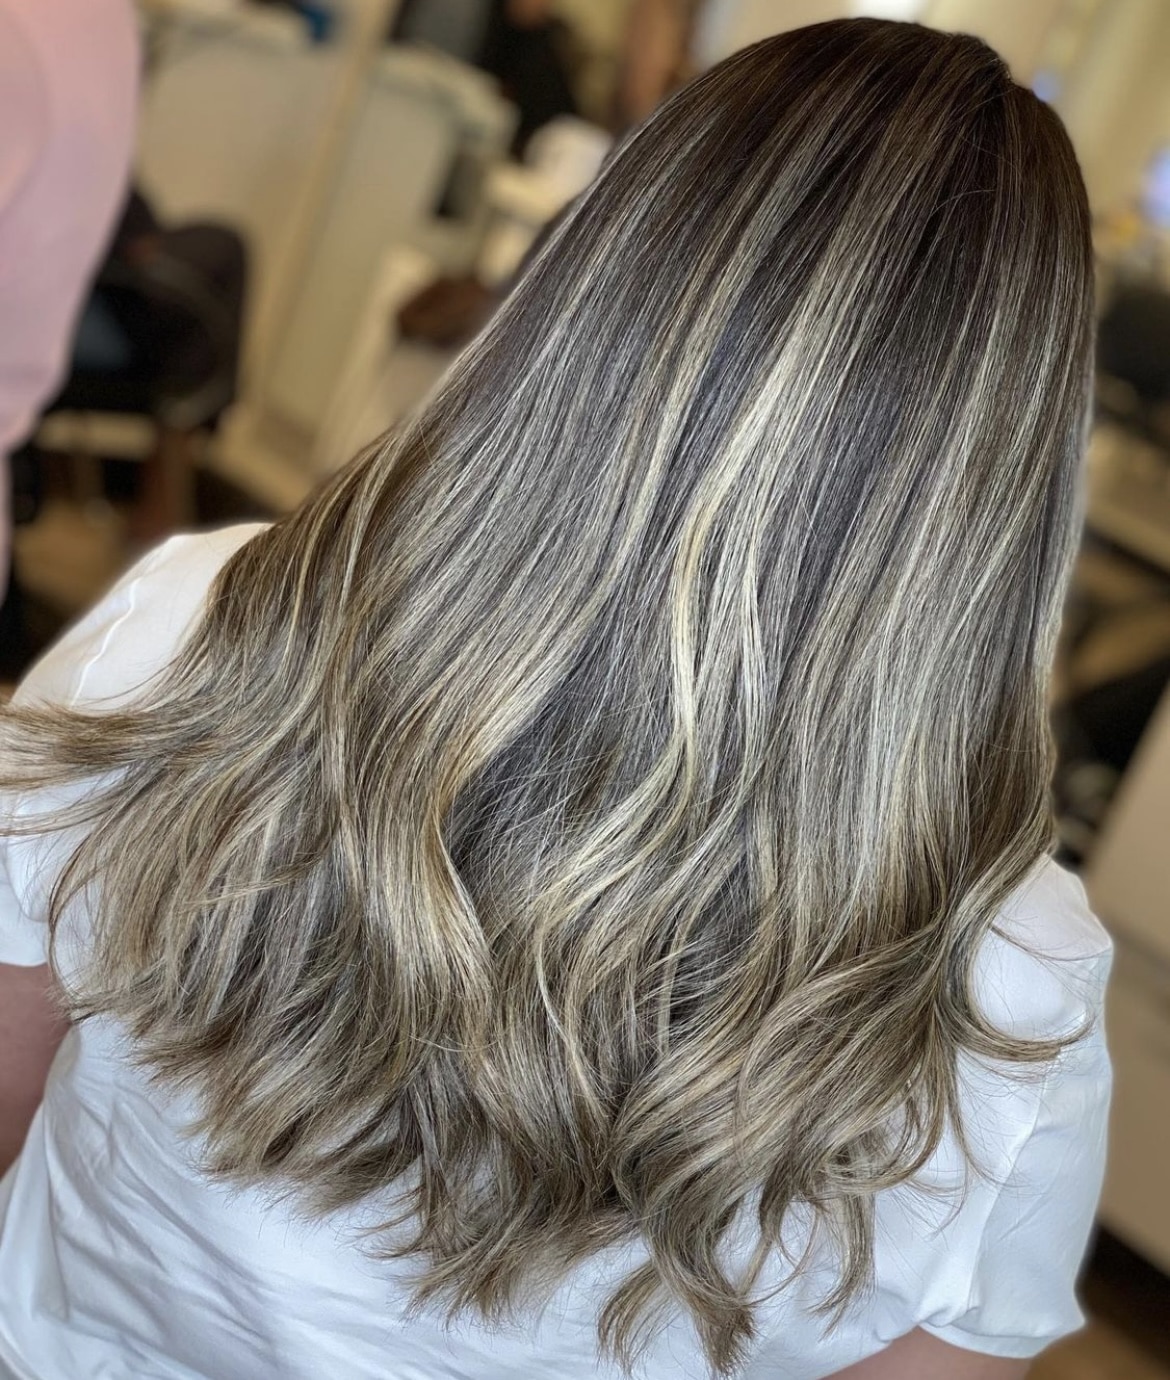 7 Ways to Find Best Hair Salon in Winter Park: What You Need To Know